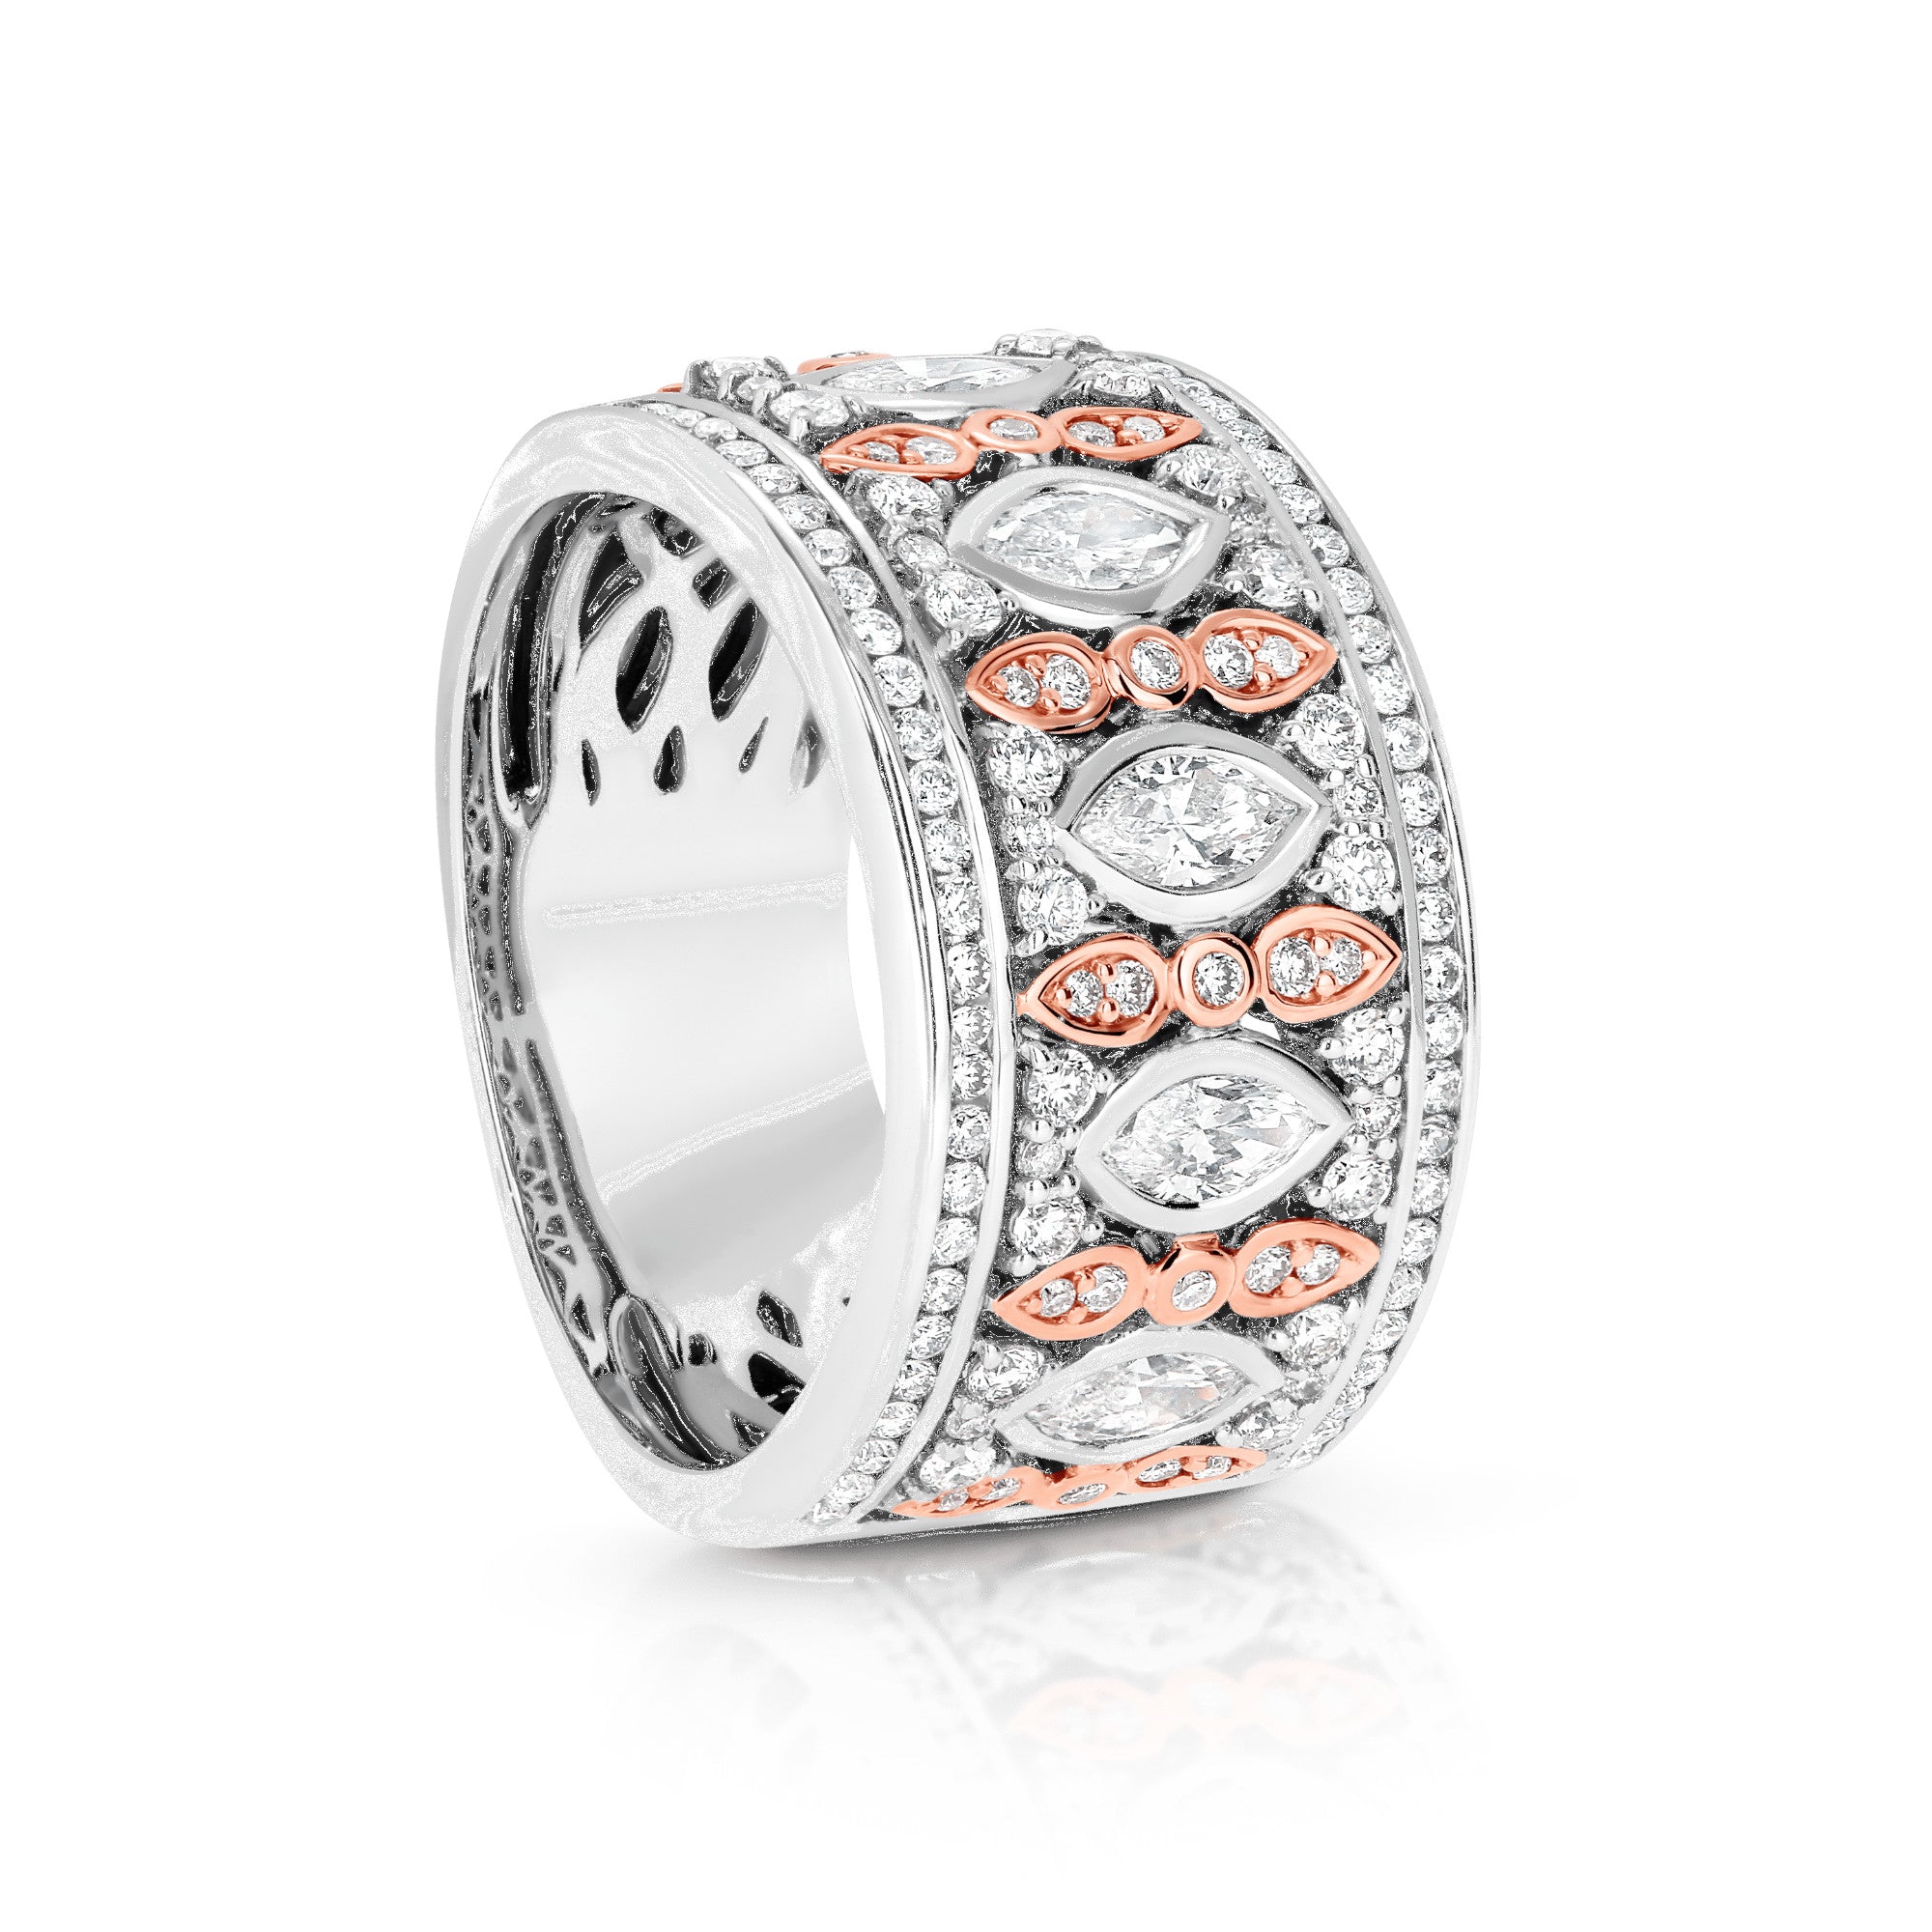 The Antoinette Ring - Limited Edition